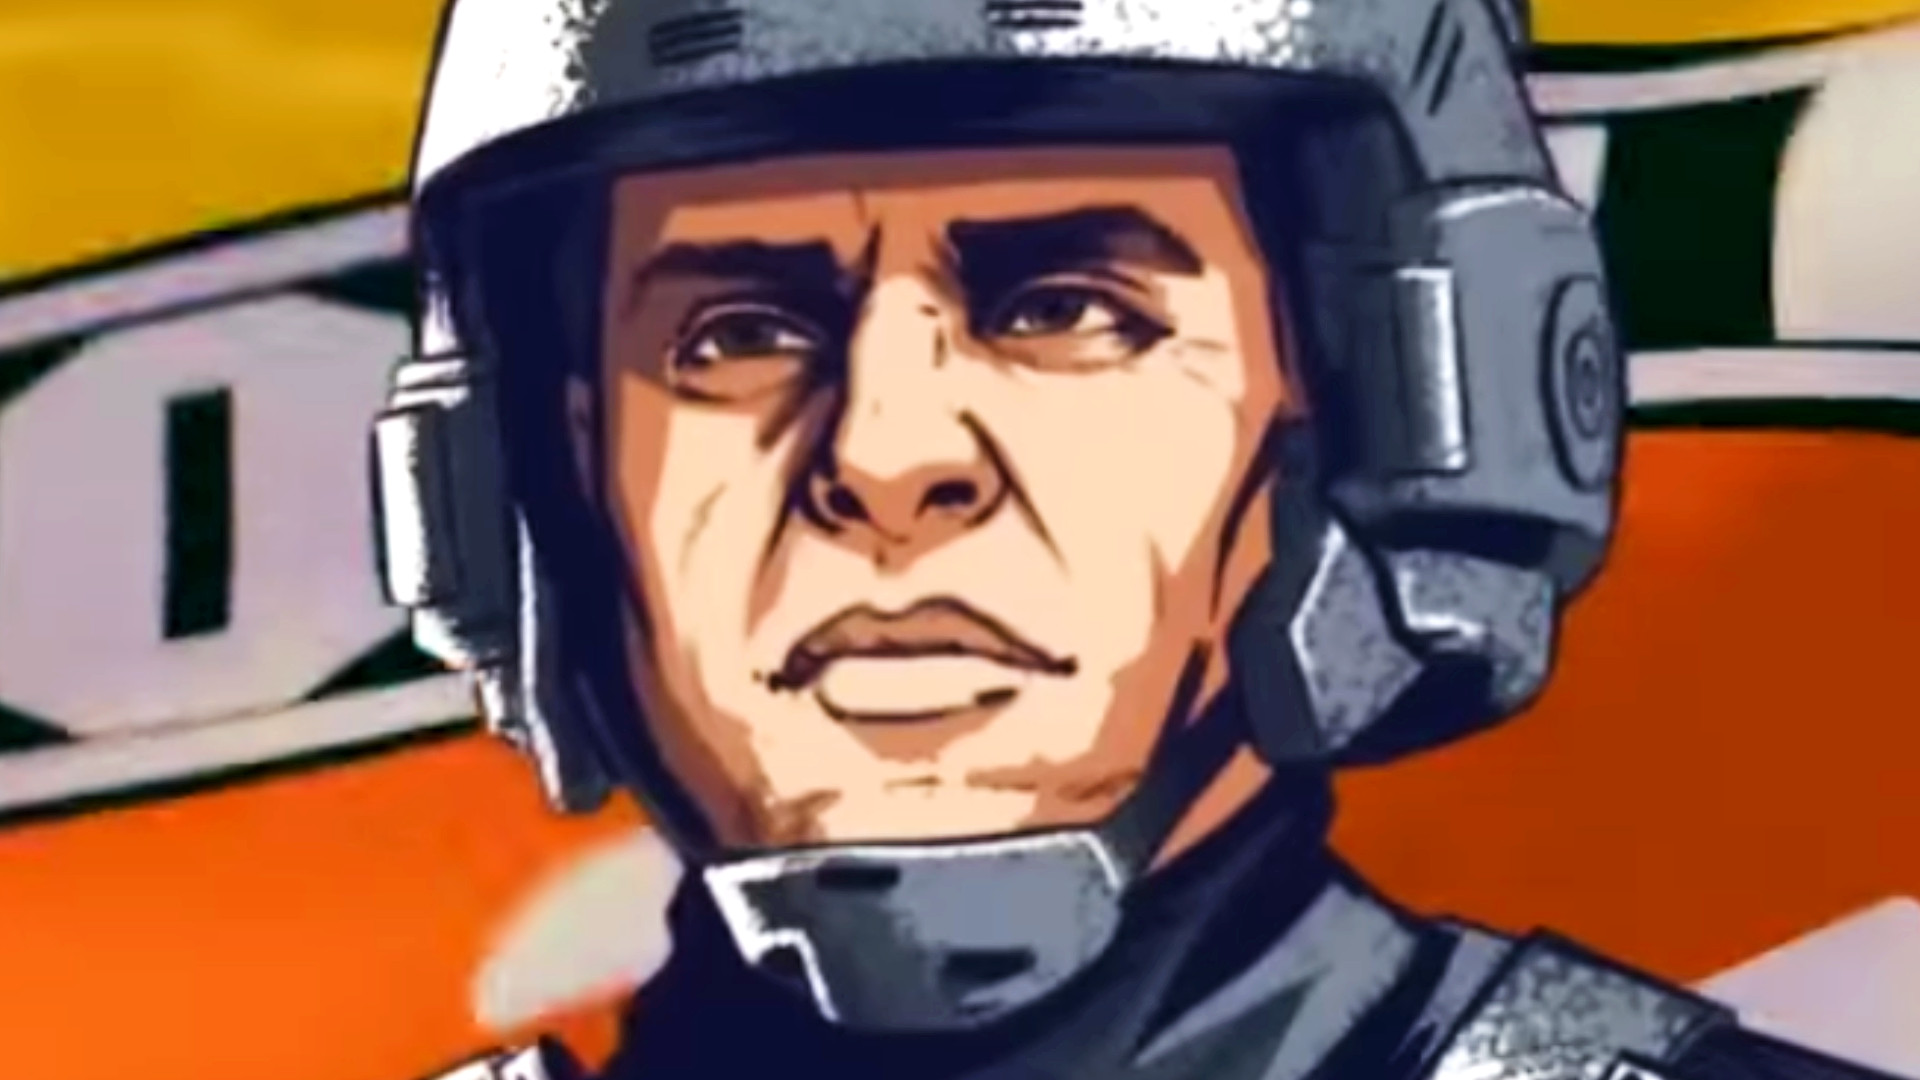 The Starship Troopers RTS is getting new DLC, and it’s cheap right now